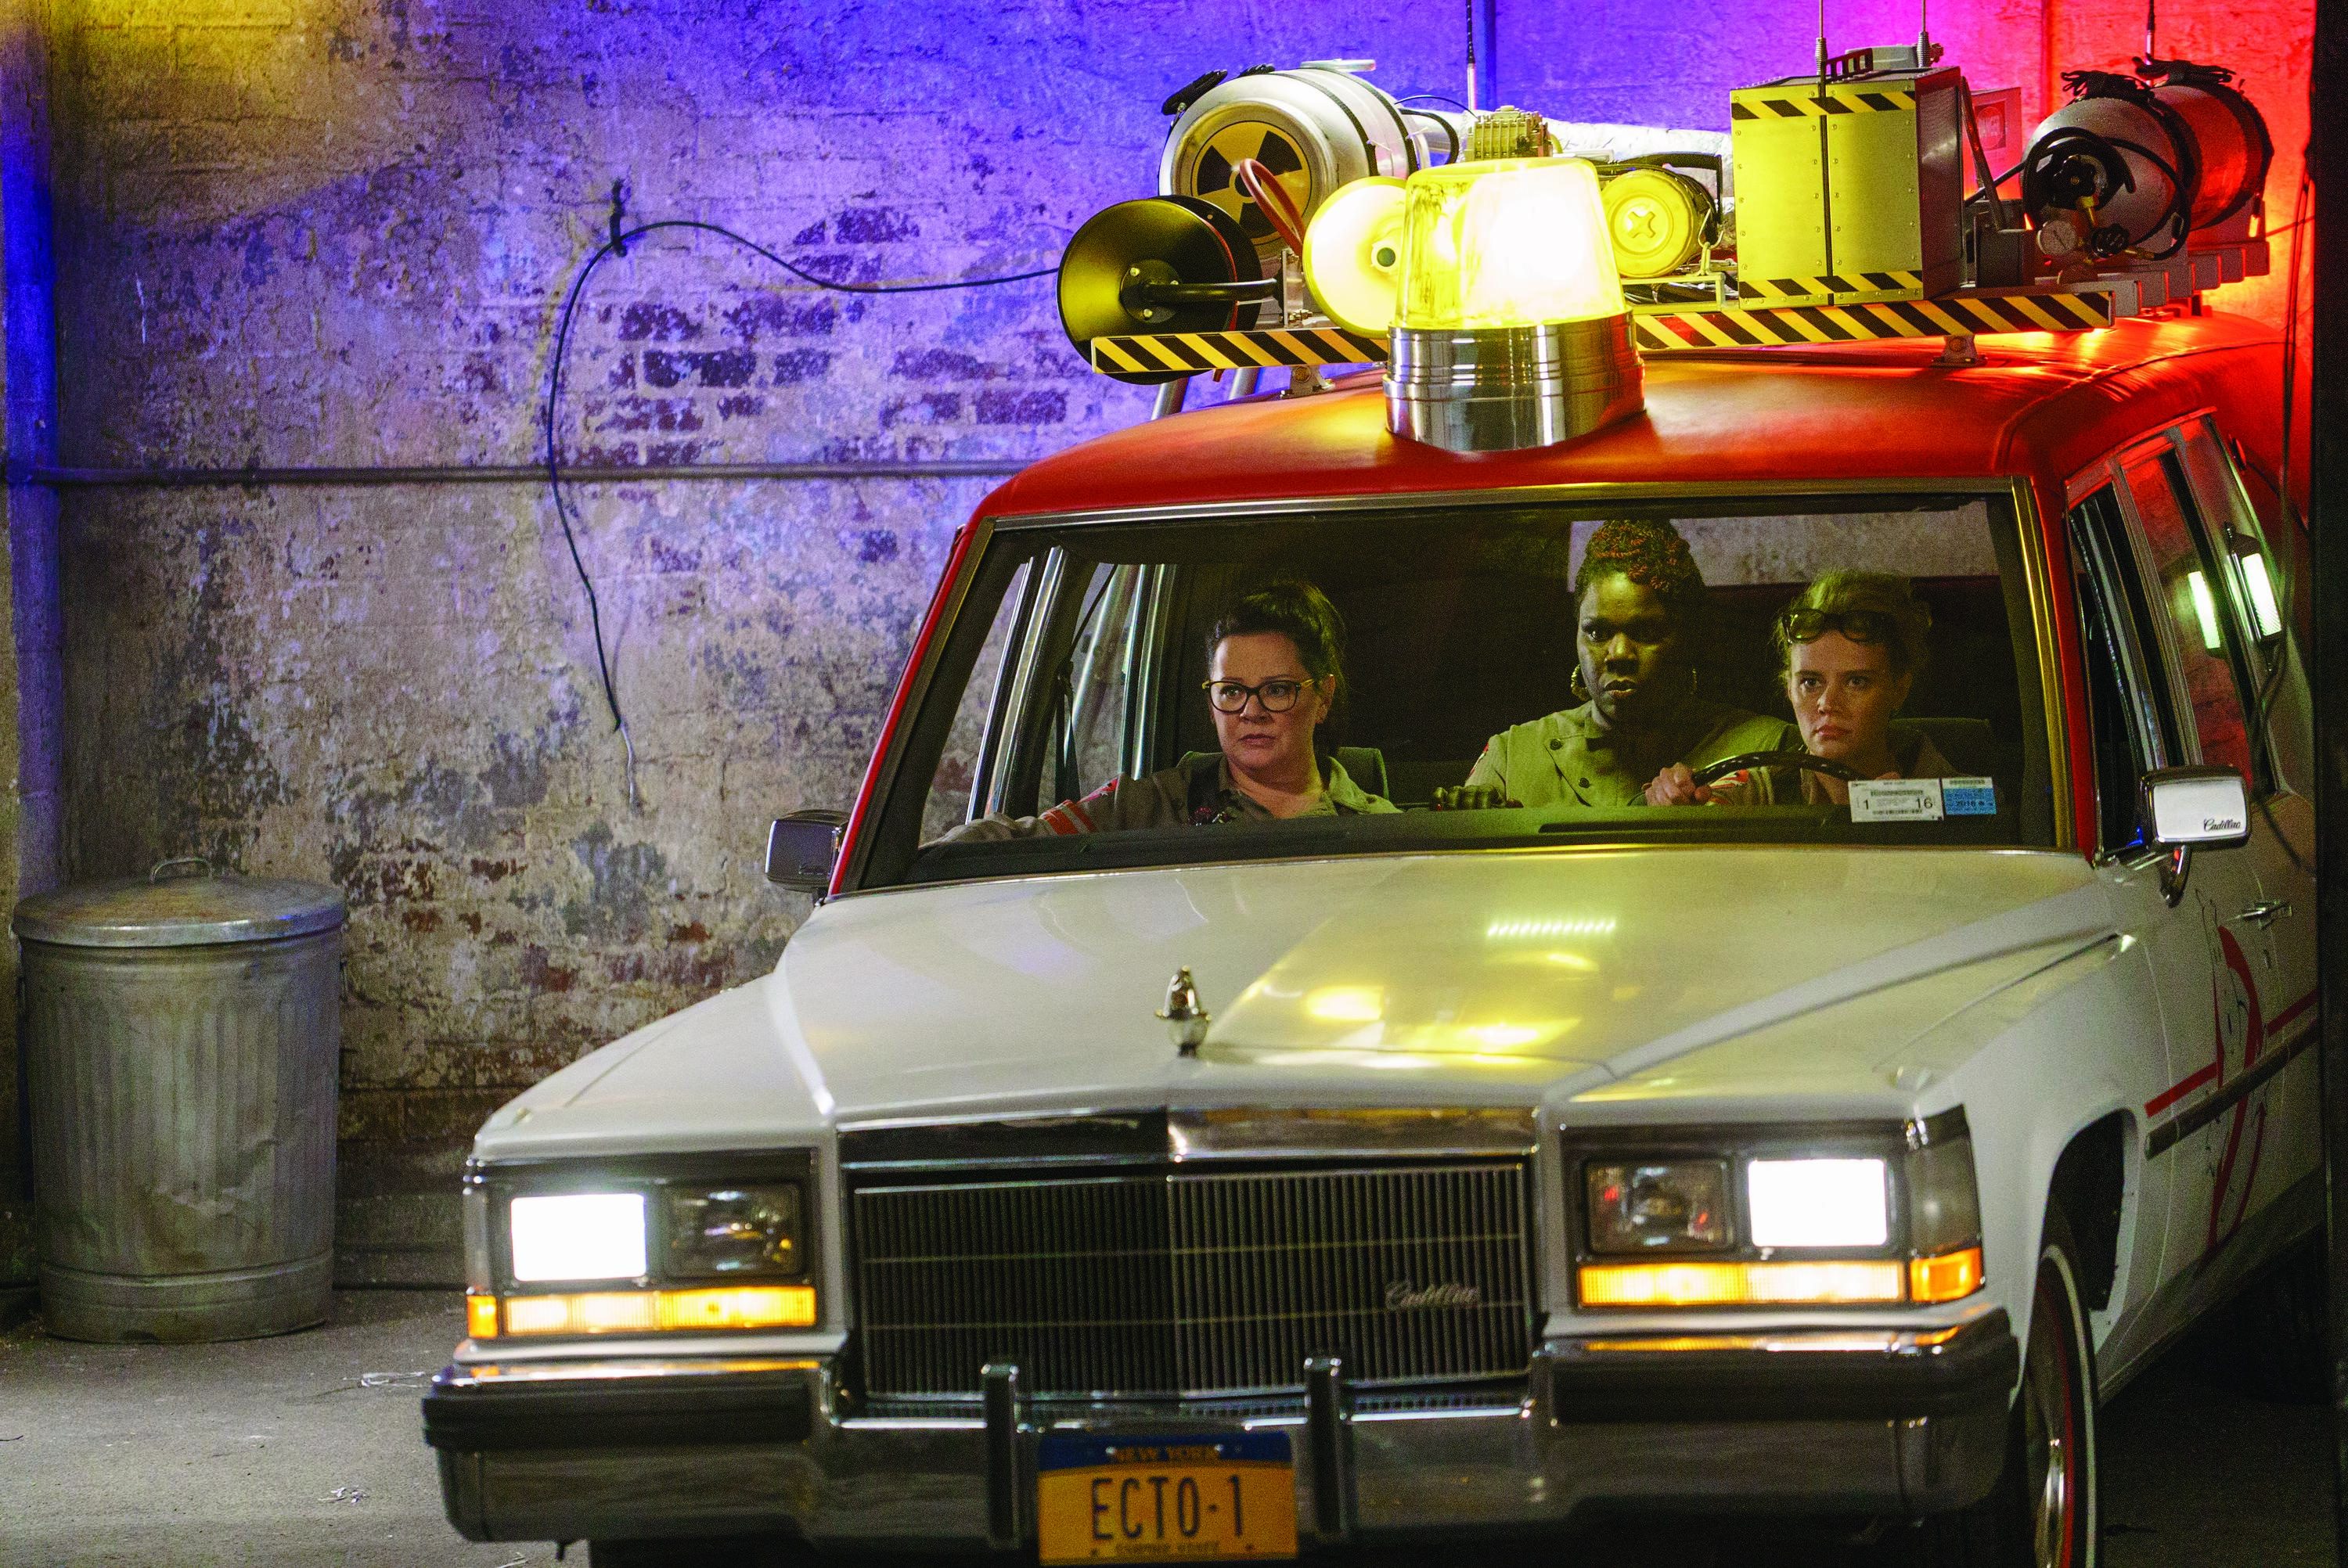 Ghostbusters Abby (Melissa McCarthy), Patty (Leslie Jones) and Holtzmann (Kate McKinnon) in the Ecto-1 in Columbia Pictures' GHOSTBUSTERS.